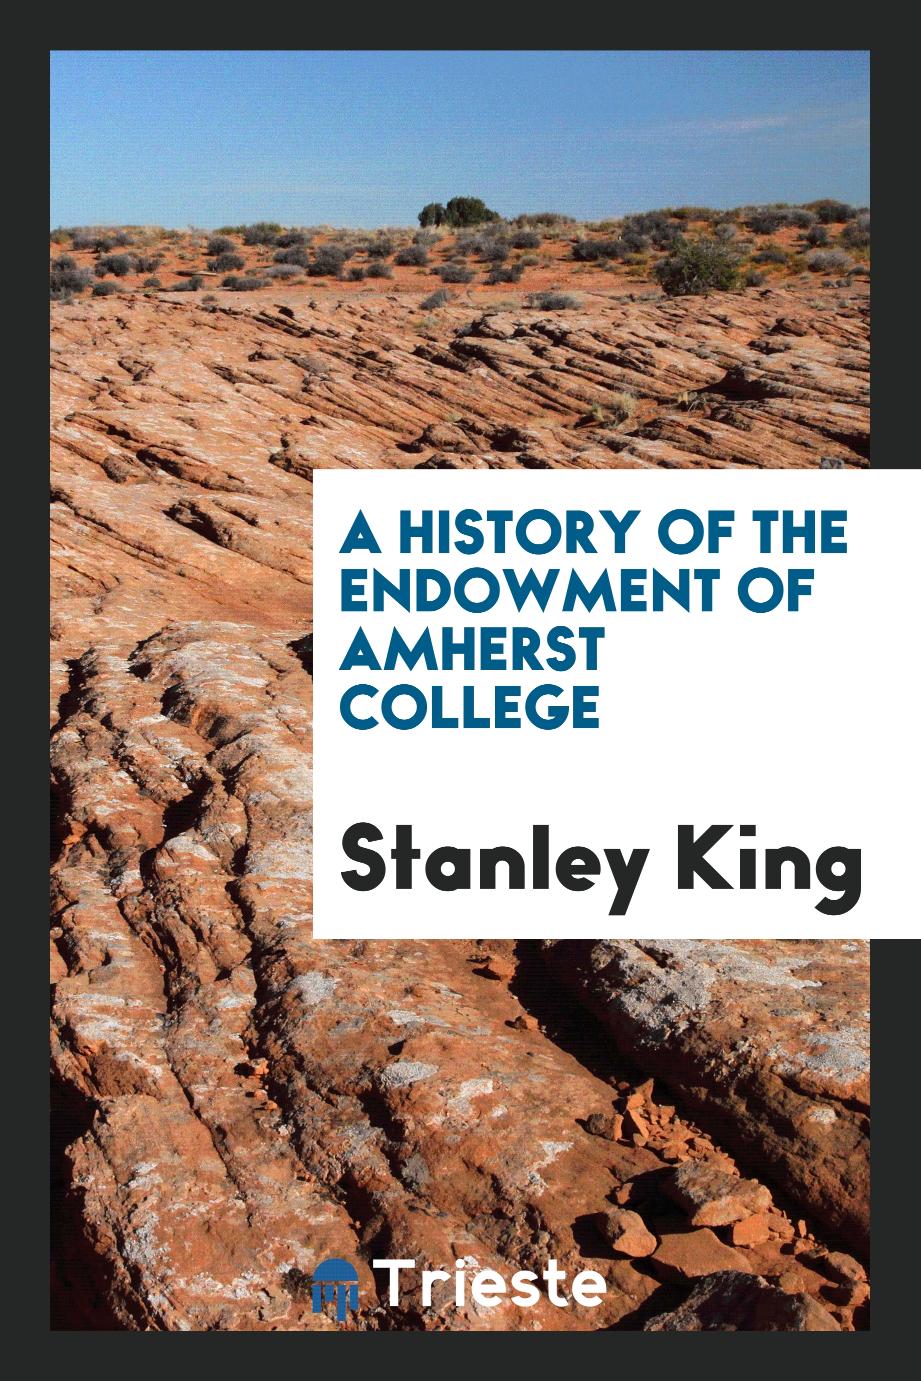 Stanley King - A history of the endowment of Amherst College